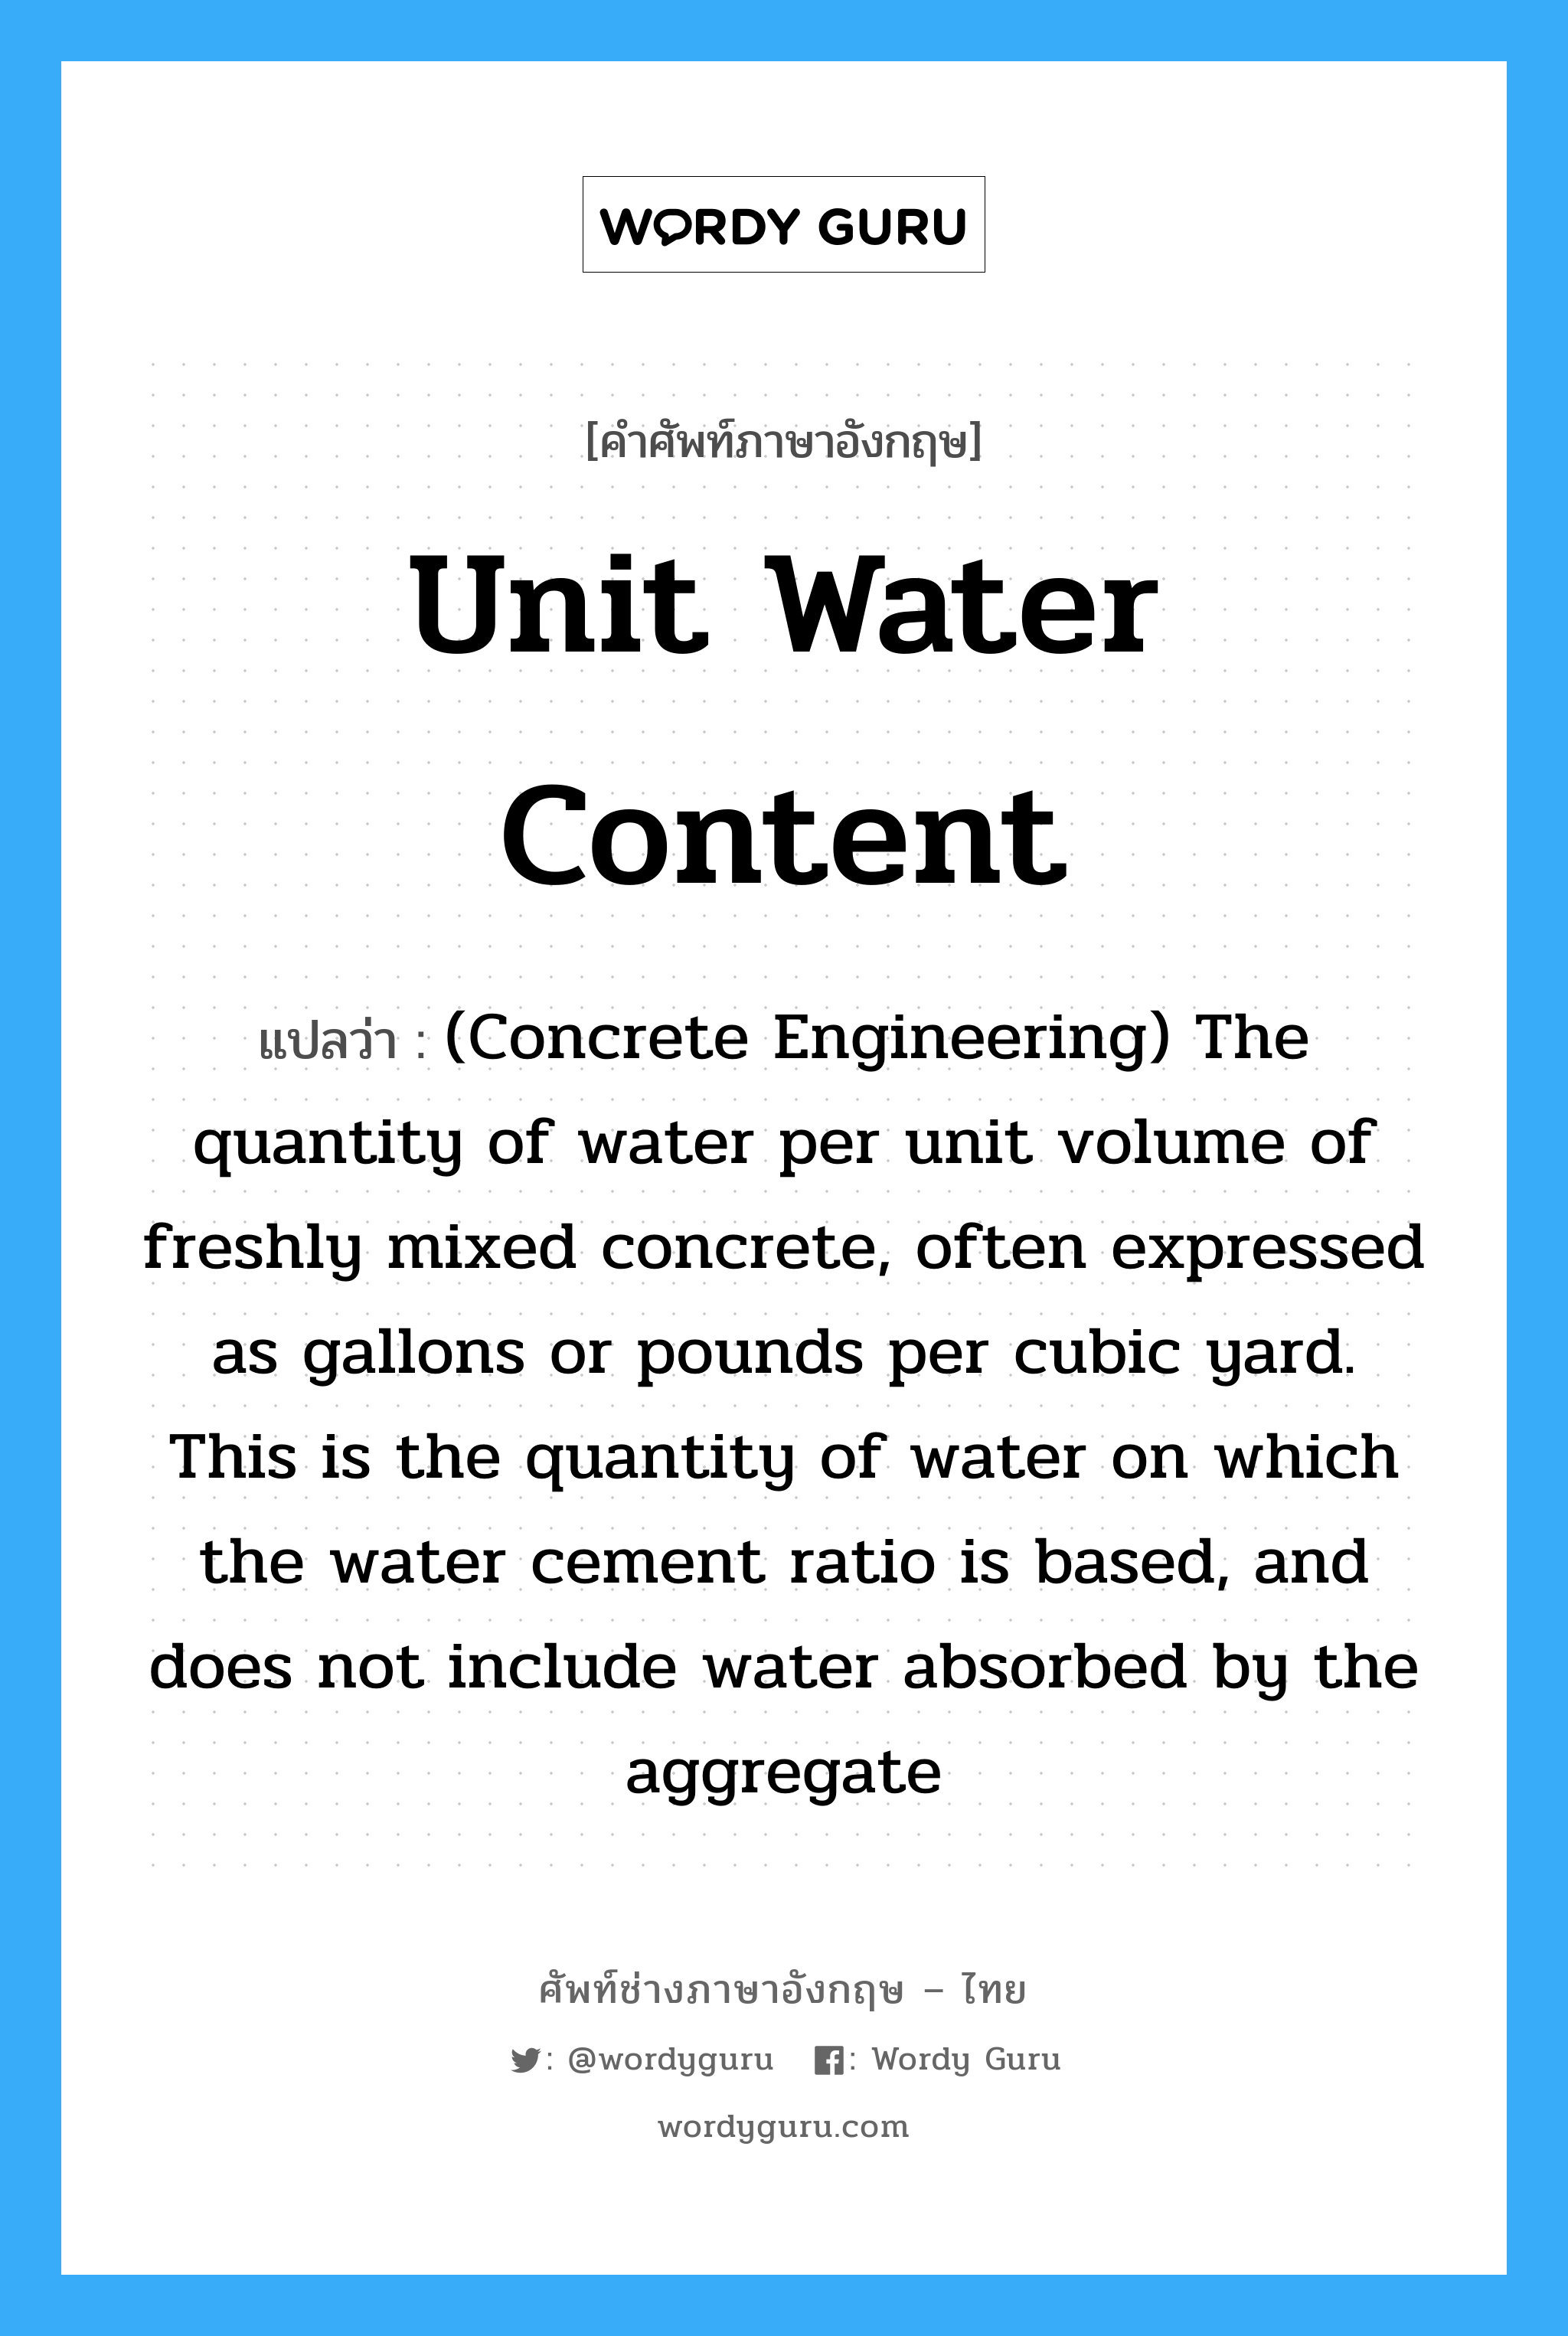 Unit Water Content แปลว่า?, คำศัพท์ช่างภาษาอังกฤษ - ไทย Unit Water Content คำศัพท์ภาษาอังกฤษ Unit Water Content แปลว่า (Concrete Engineering) The quantity of water per unit volume of freshly mixed concrete, often expressed as gallons or pounds per cubic yard. This is the quantity of water on which the water cement ratio is based, and does not include water absorbed by the aggregate